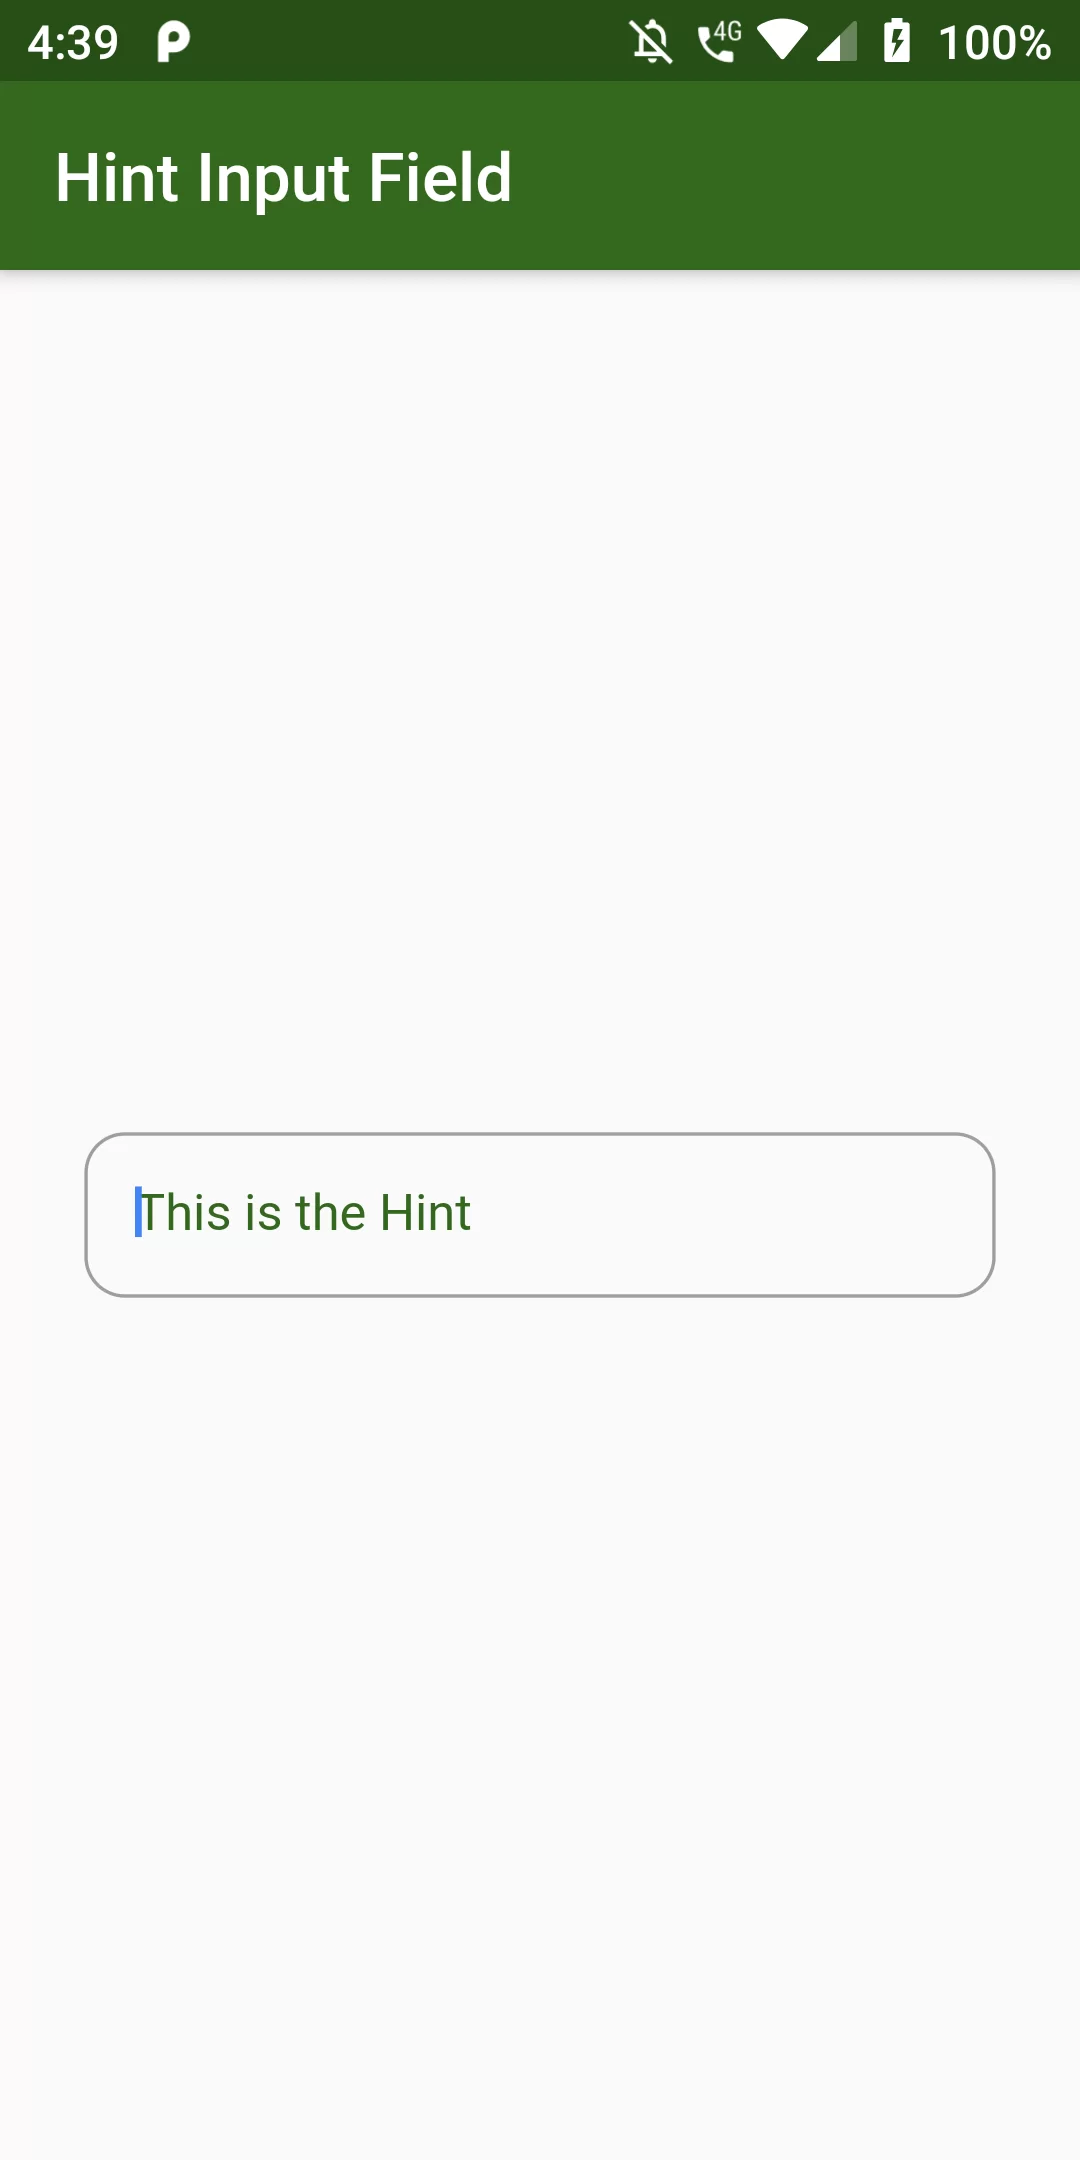 How To Create Text Field Input With Hint Using Flutter App